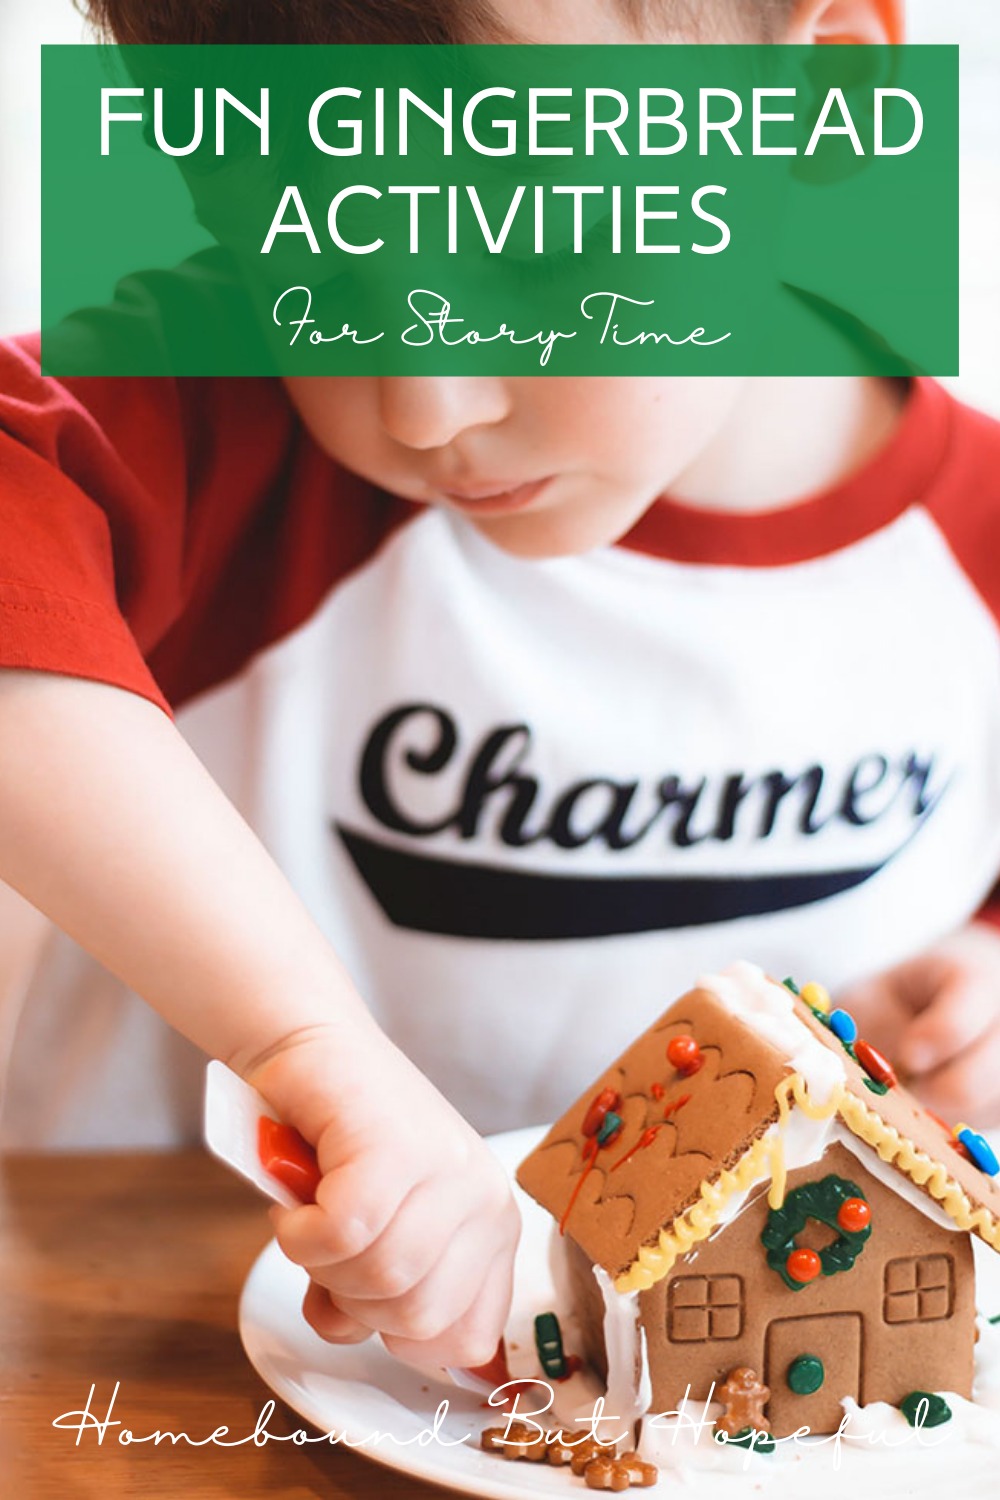 Check out all these fun ideas - and free printables - for a sweet gingerbread themed story time!